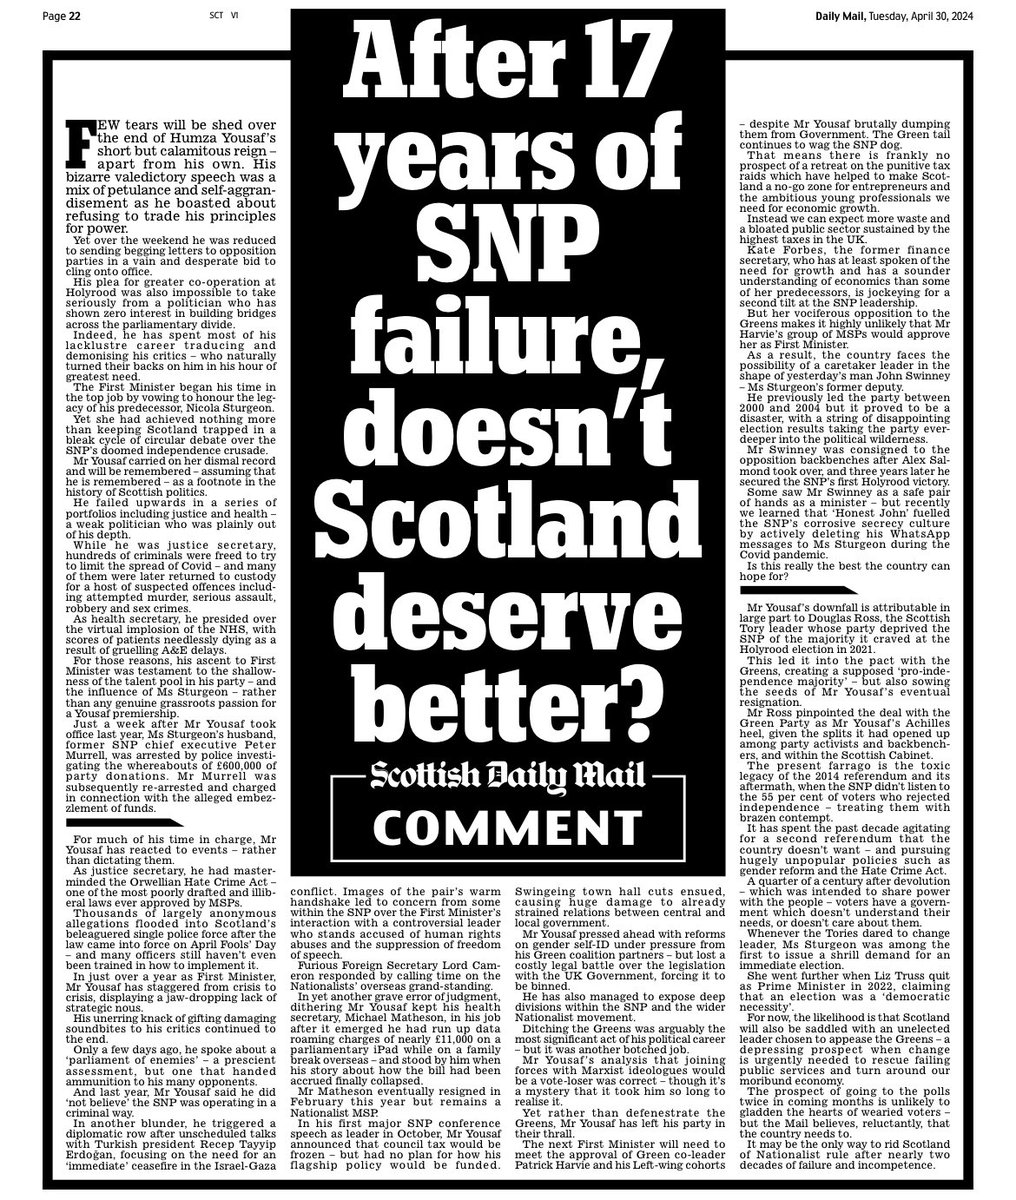 ✍️ From today’s leader column: The Mail calls for an election to give Scotland a chance of ending nearly 20 toxic years of SNP incompetence and failure. Read more on #MailPlus 👉 mailplus.co.uk/scottish-editi…